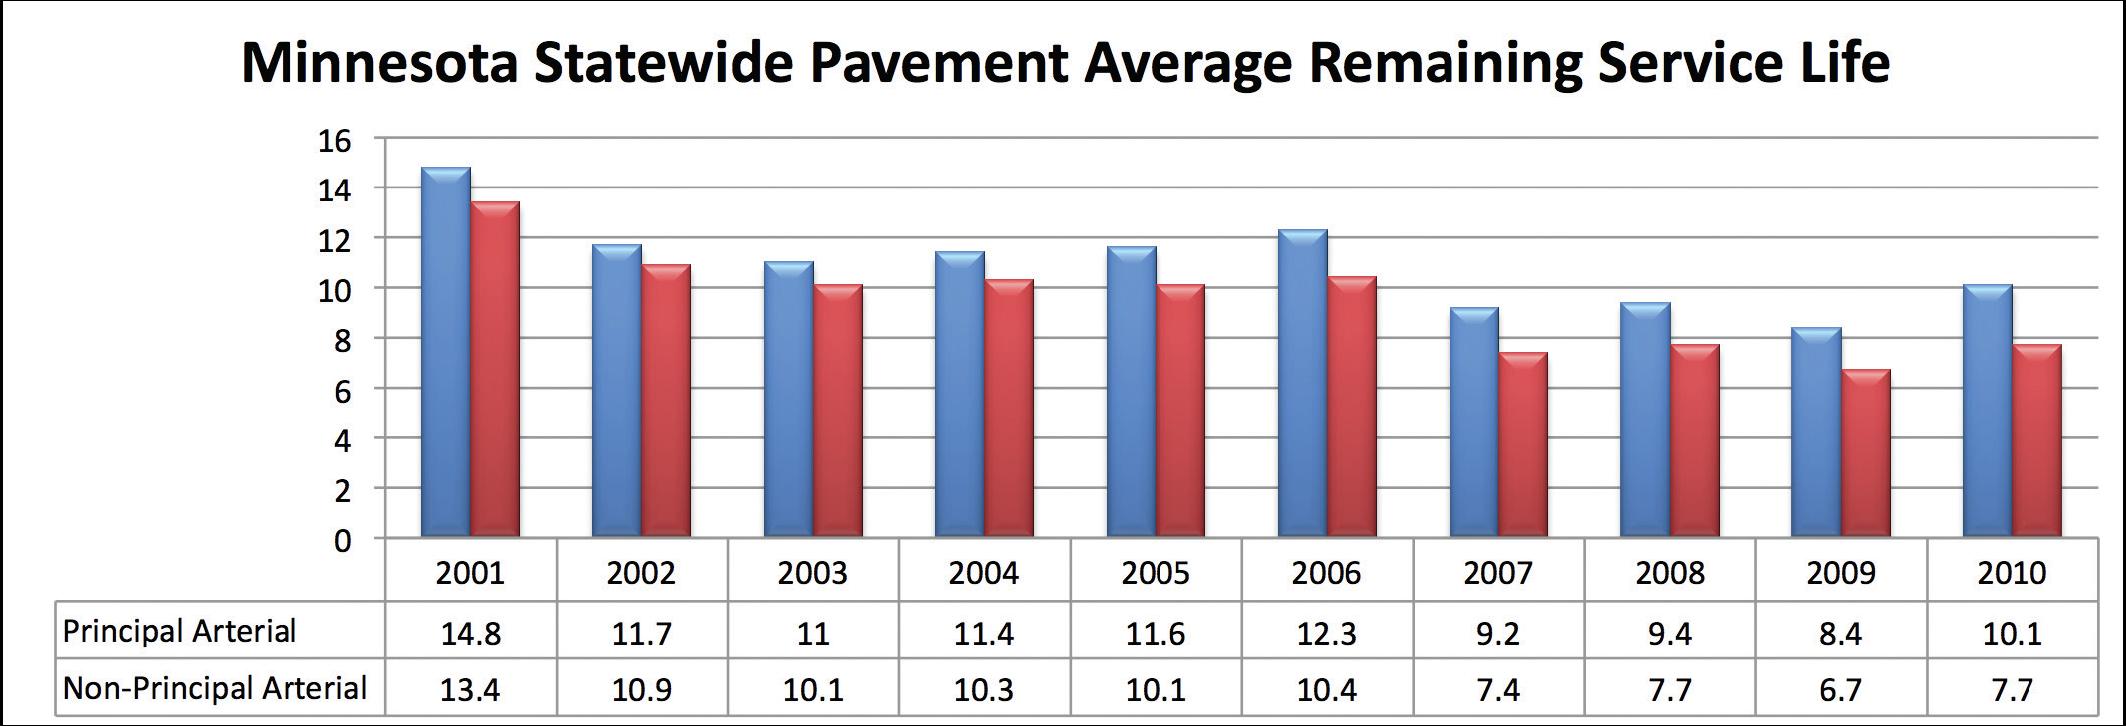 Figure 31 illustrates the decrease in remaining service life for Minnesota pavements.  In 2001, the principal arterials had an average remaining service life of 14 point 8 years and that steadily declines until by 2010 the remaining service life average for principal arterials is only 10 point one years.  For non-principal arterials, the remaining service life was 13 point 4 years in 2001 and steadily declined to 7 point 7 years in 2010.